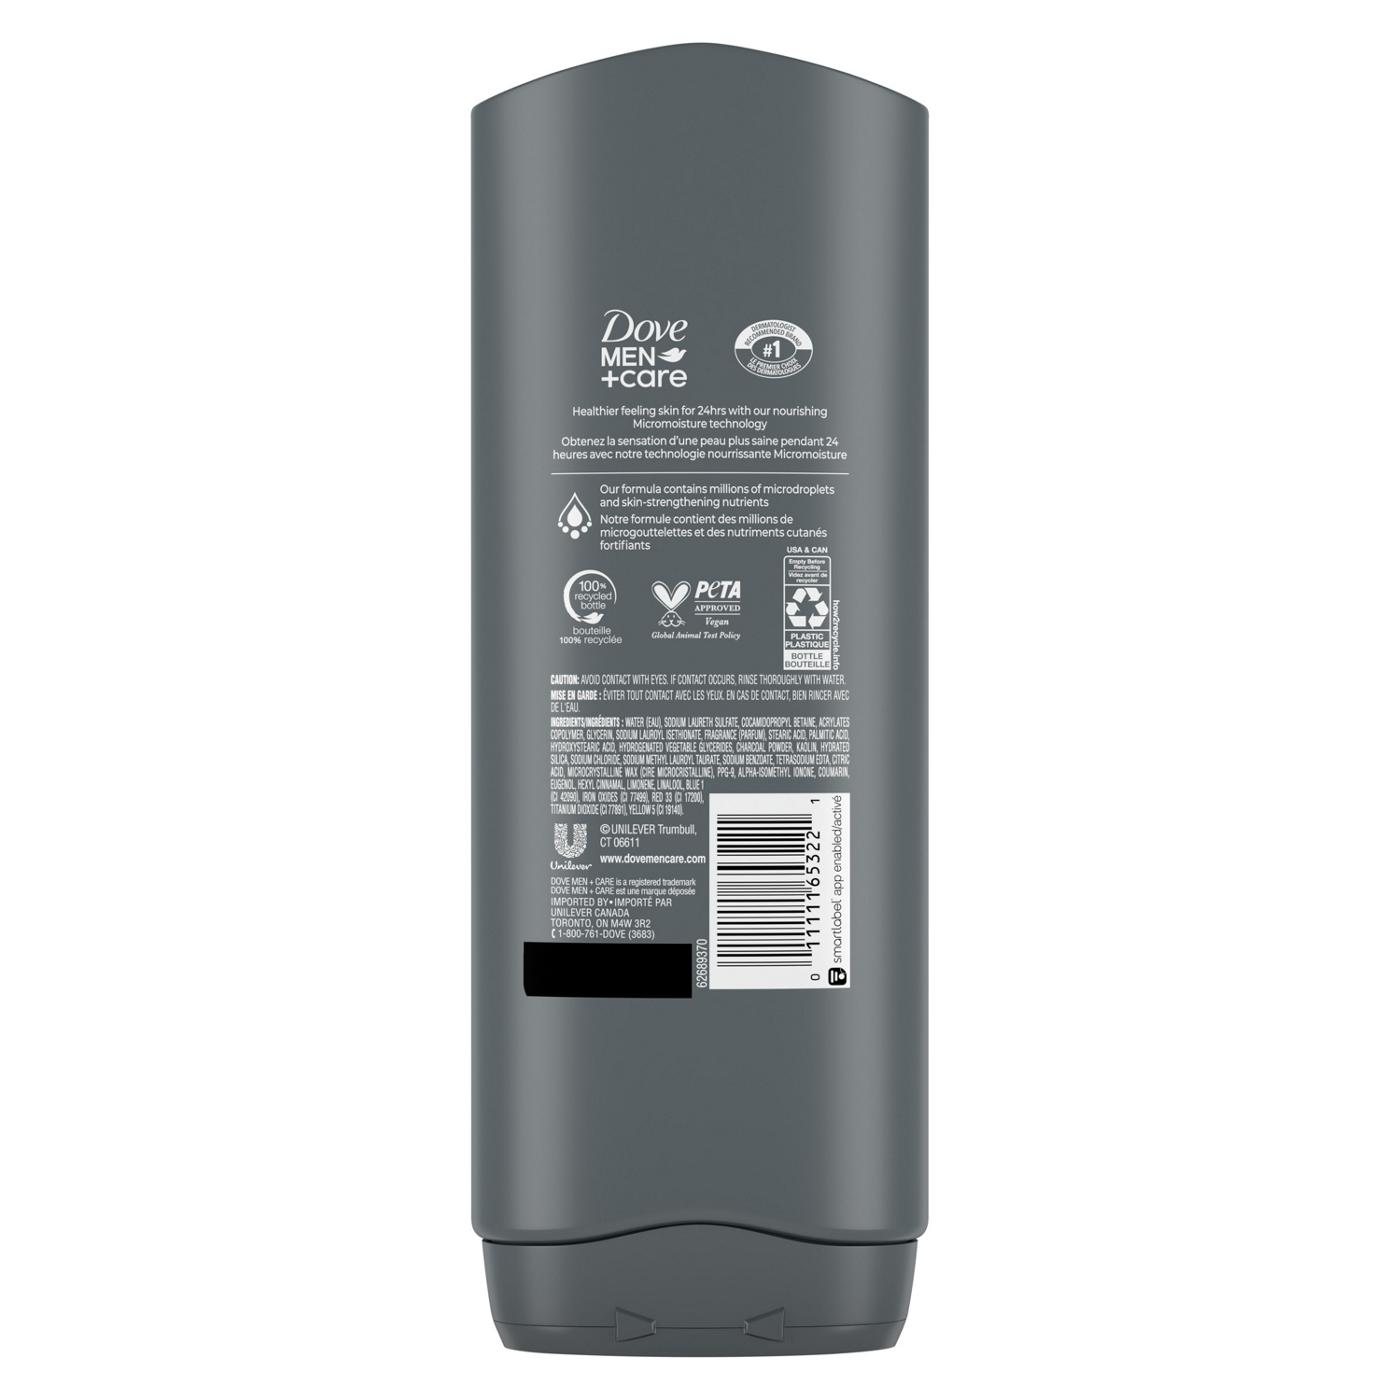 Dove Men+Care Elements Body + Face Wash - Charcoal + Clay ; image 3 of 3